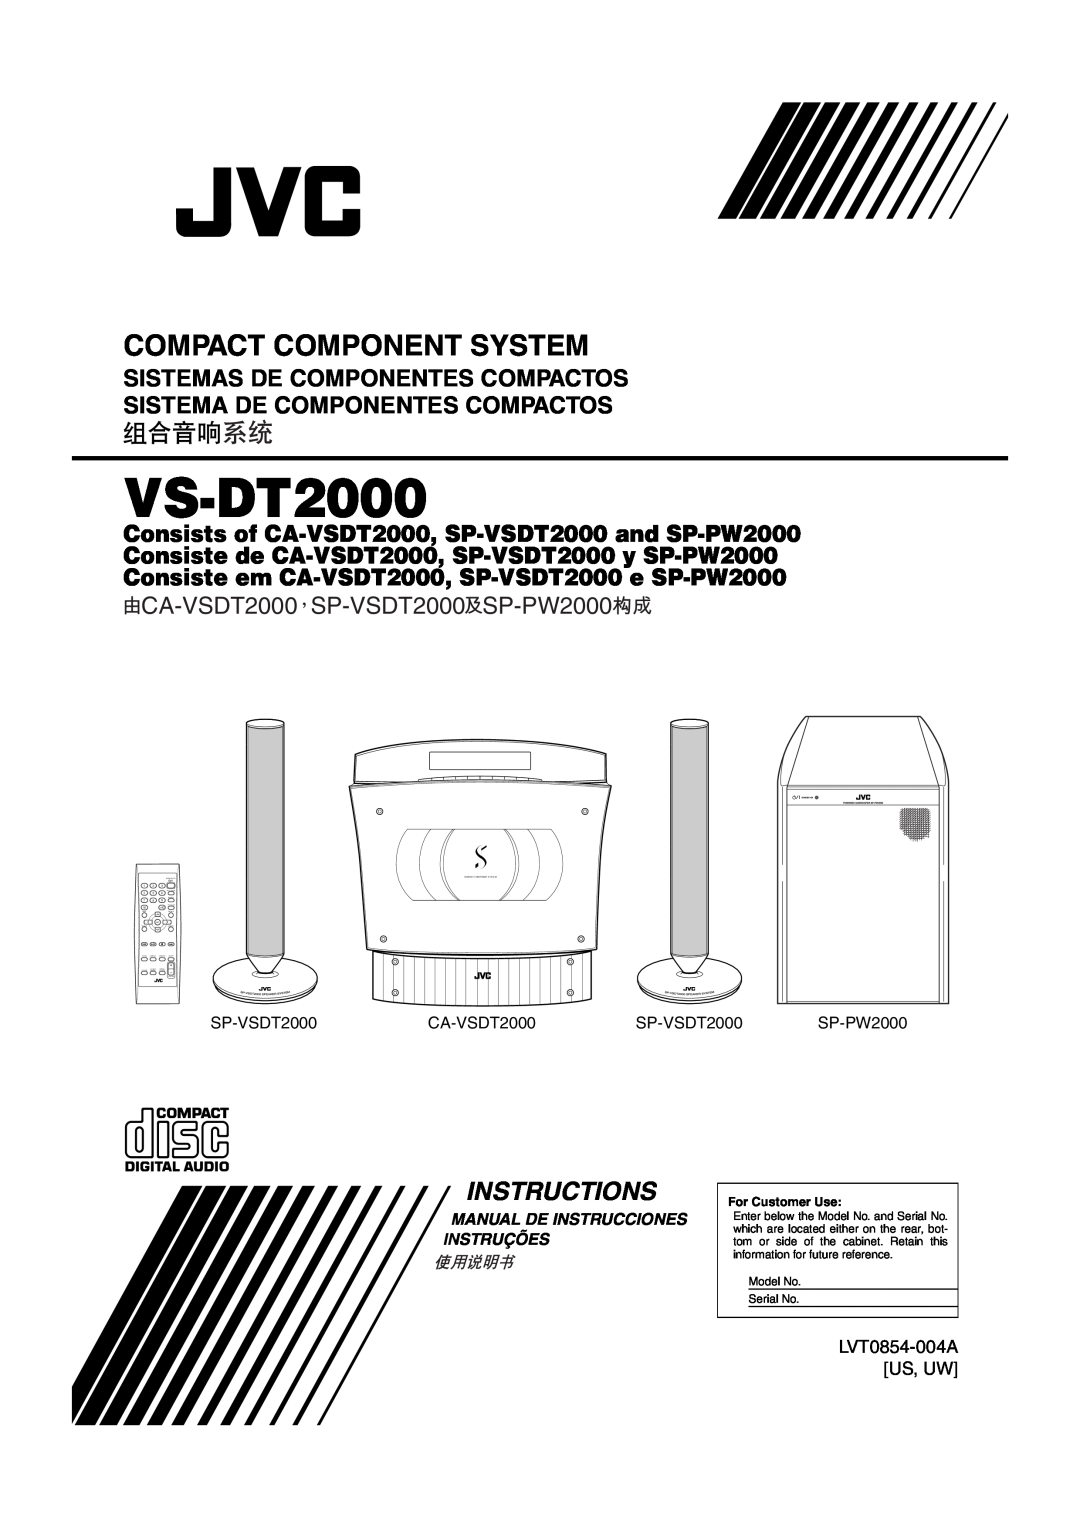 JVC VS-DT2000 manual Compact Component System, Instructions 